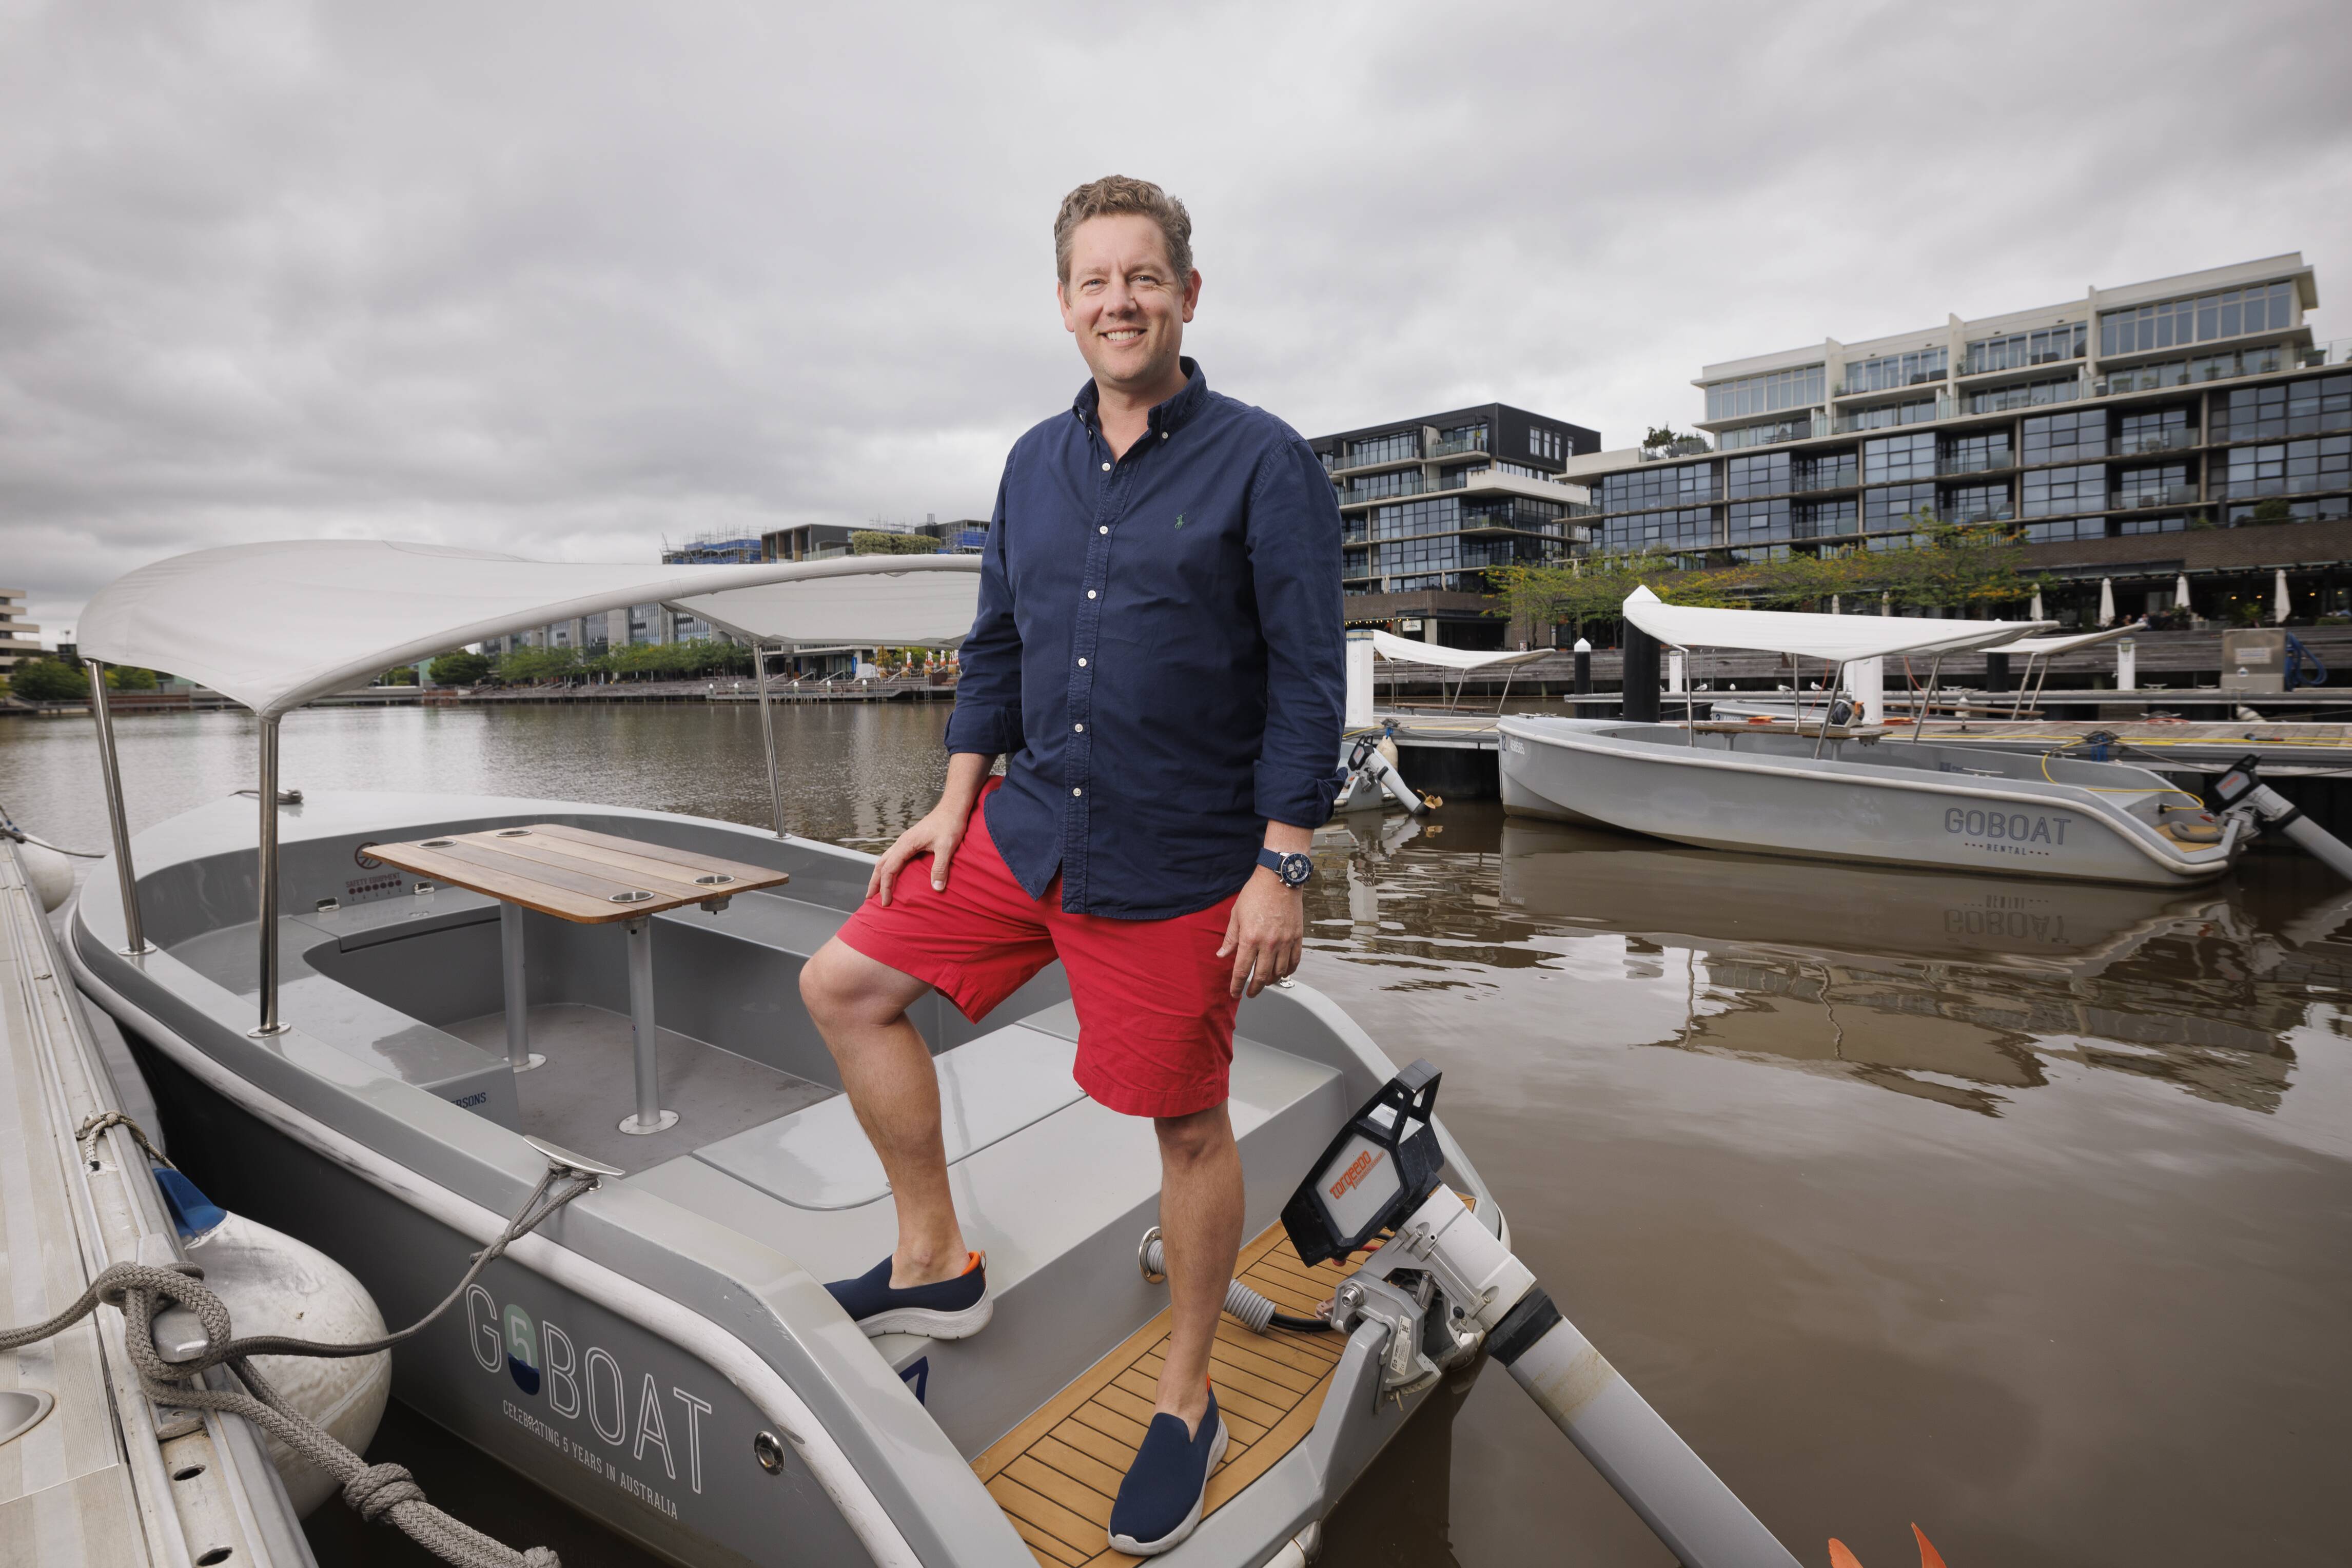 GoBoat: Canberra's Self-Captained Electric Picnic Boats, The Canberra  Times